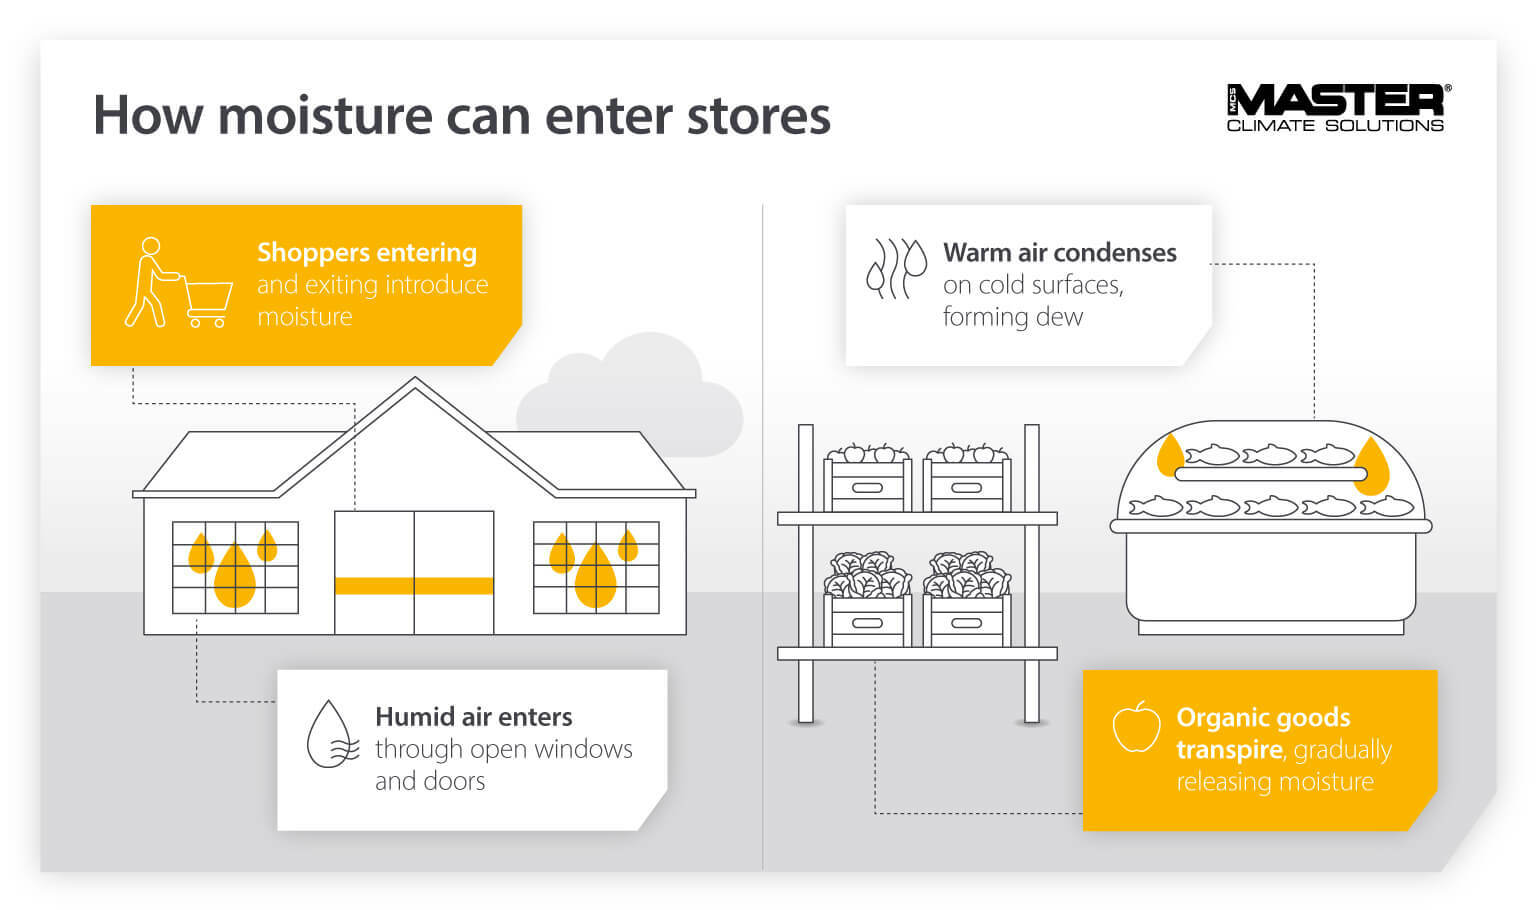 How problematic moisture enters supermarkets and food stores - Infographic image